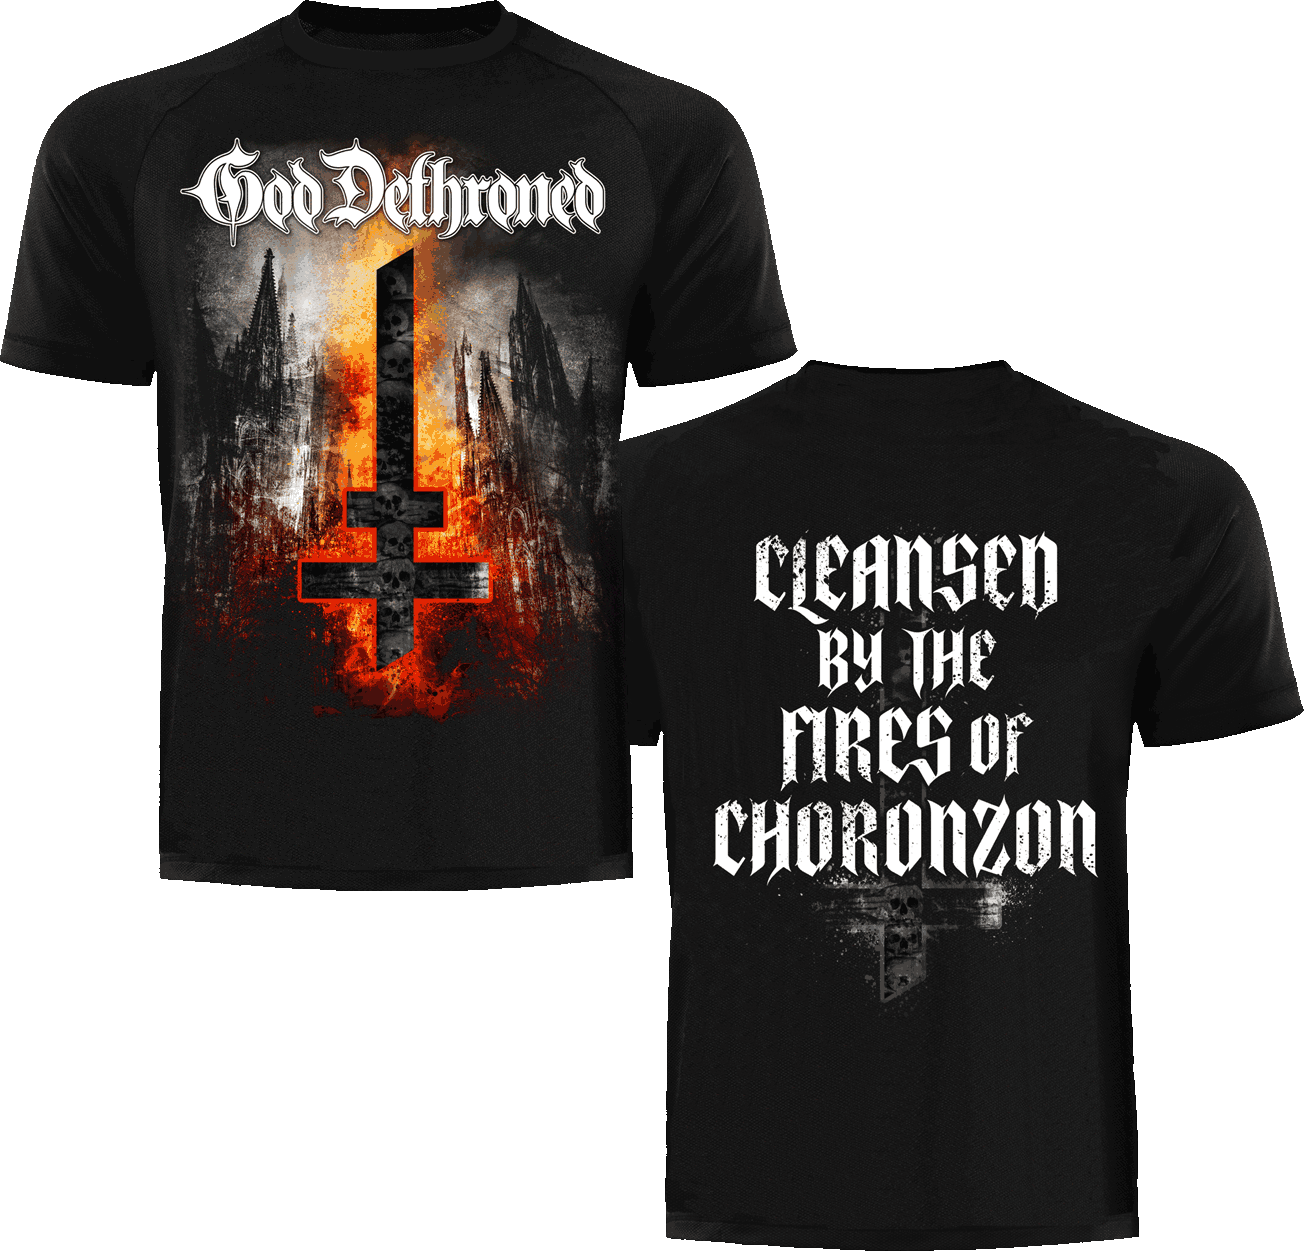 Choronzon t-shirt by God Dethroned - front & back